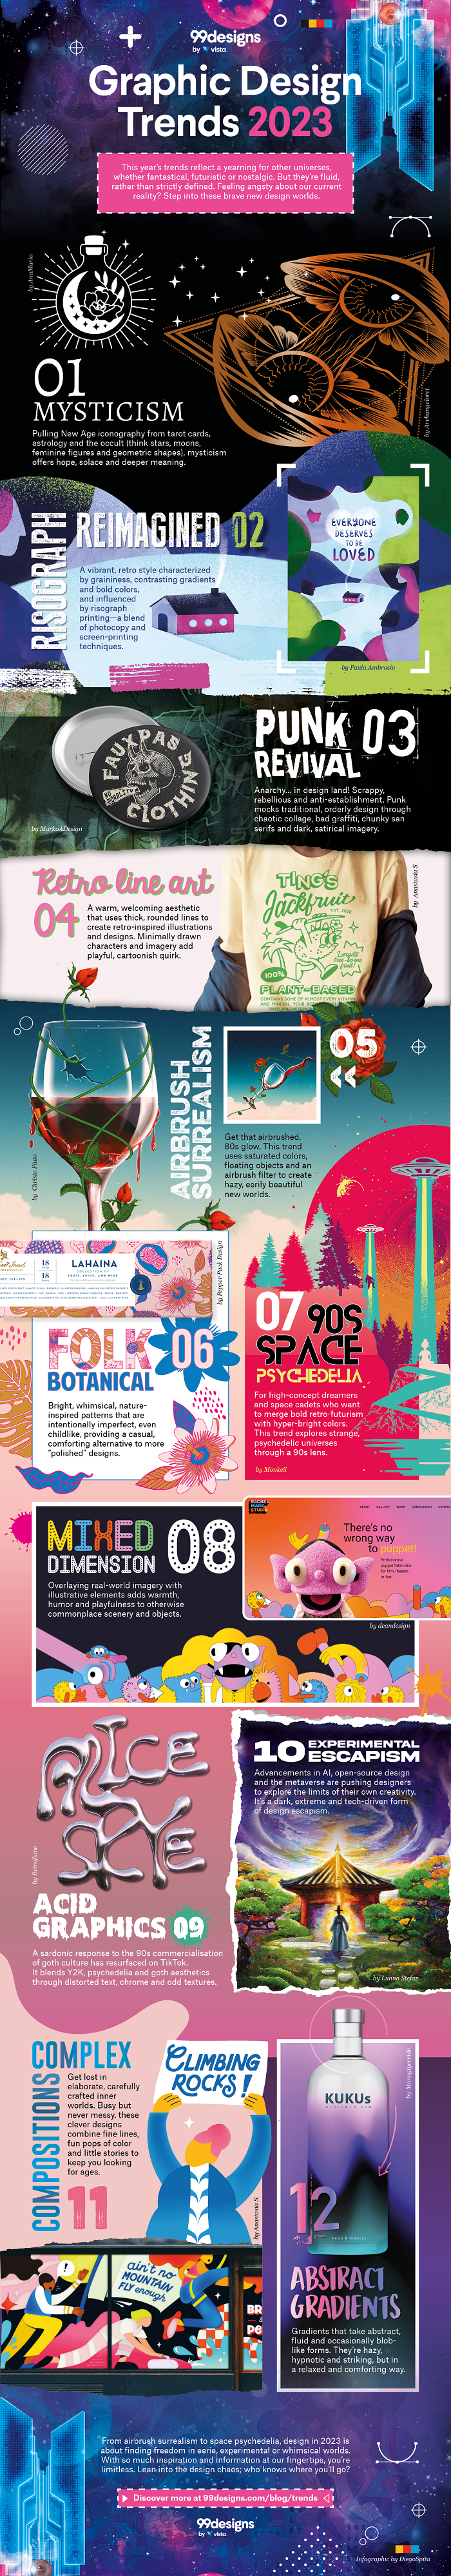 Graphic Design Trends for 2023 - Infographic